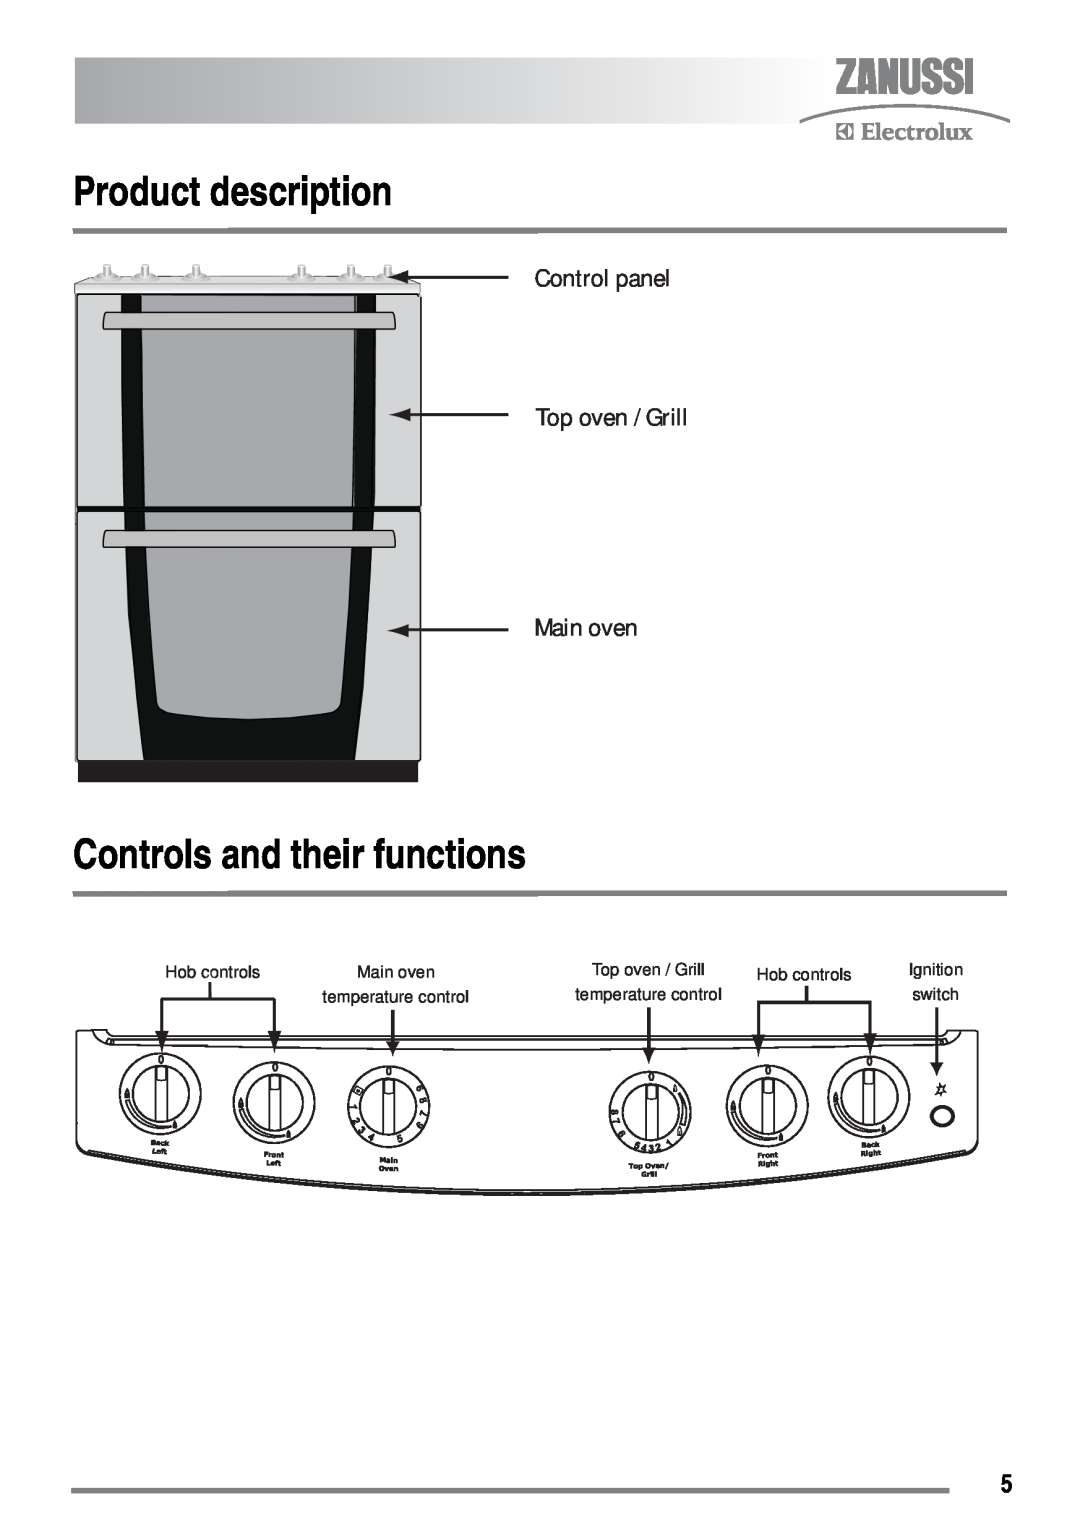 Zanussi ZKG6010 Product description, Controls and their functions, Control panel Top oven / Grill Main oven, Hob controls 